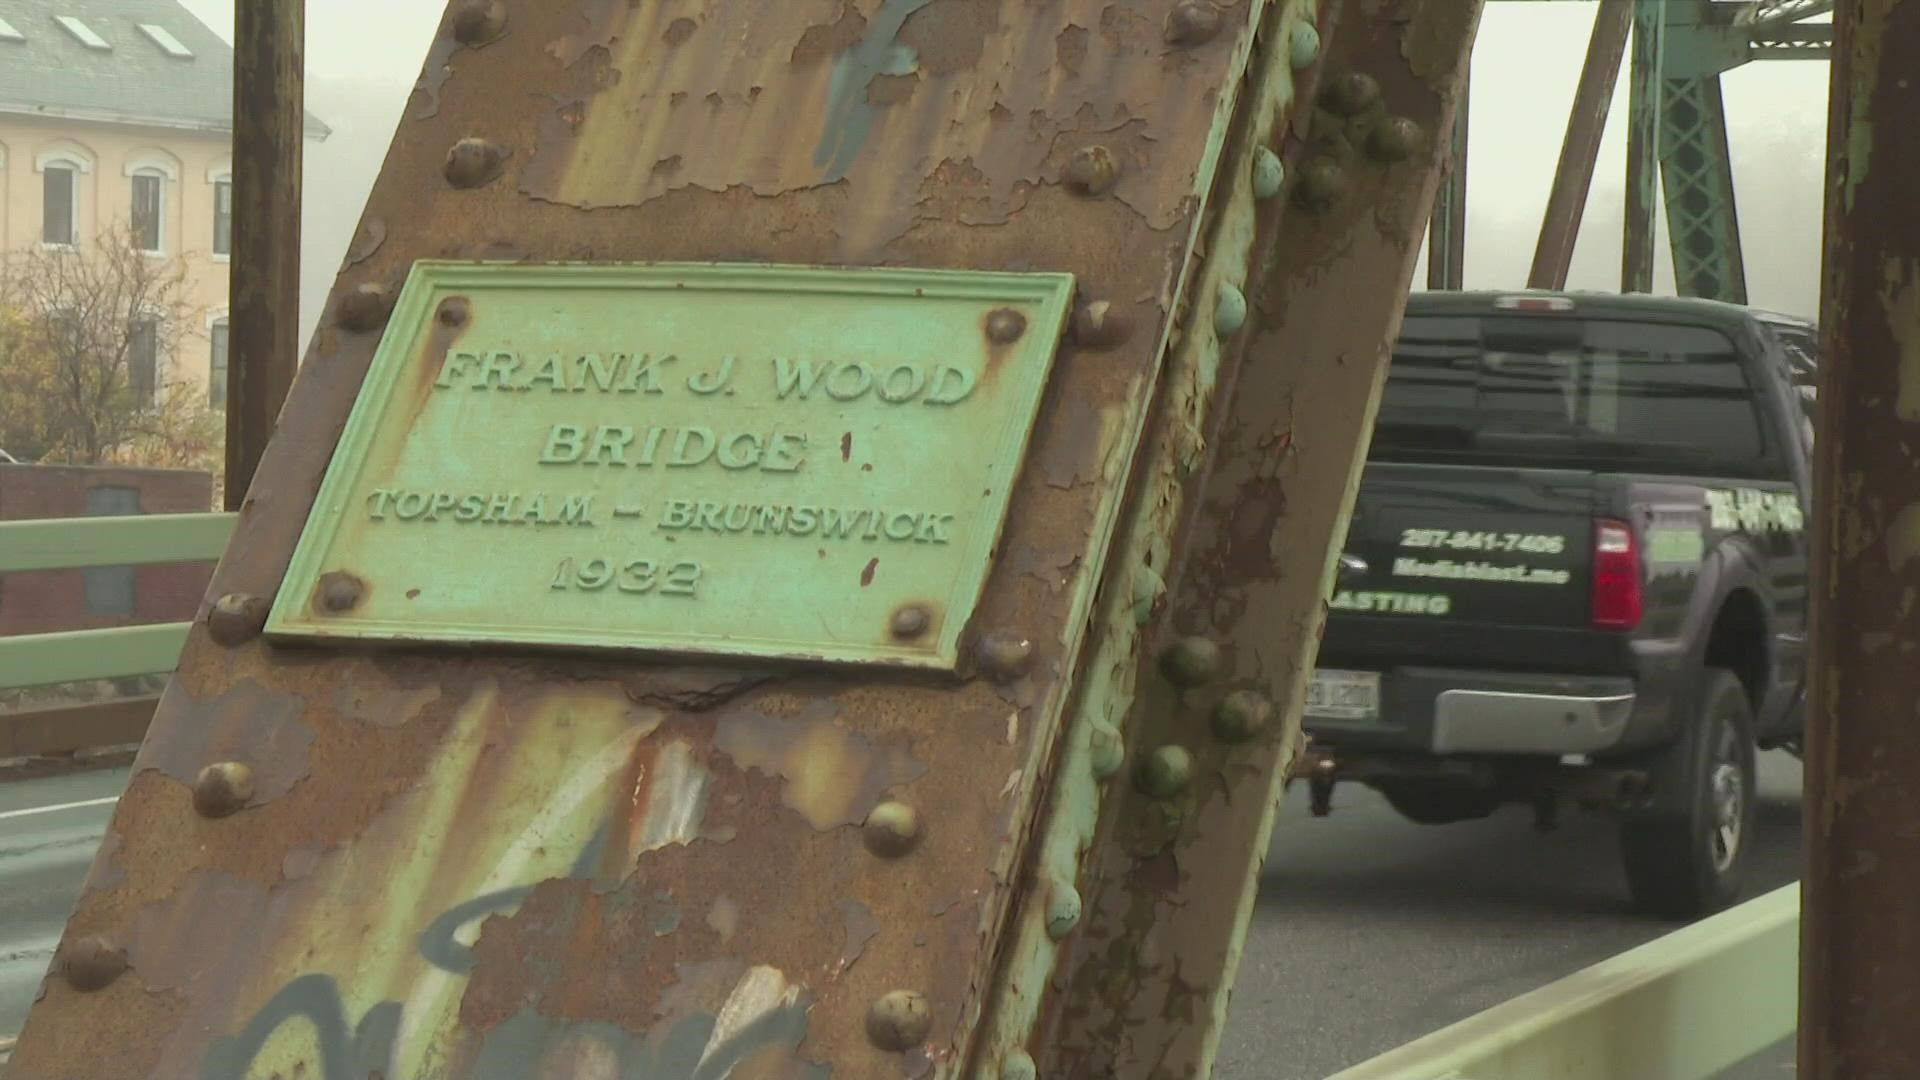 The MaineDOT made the announcement regarding the Frank J. Wood bridge this week.